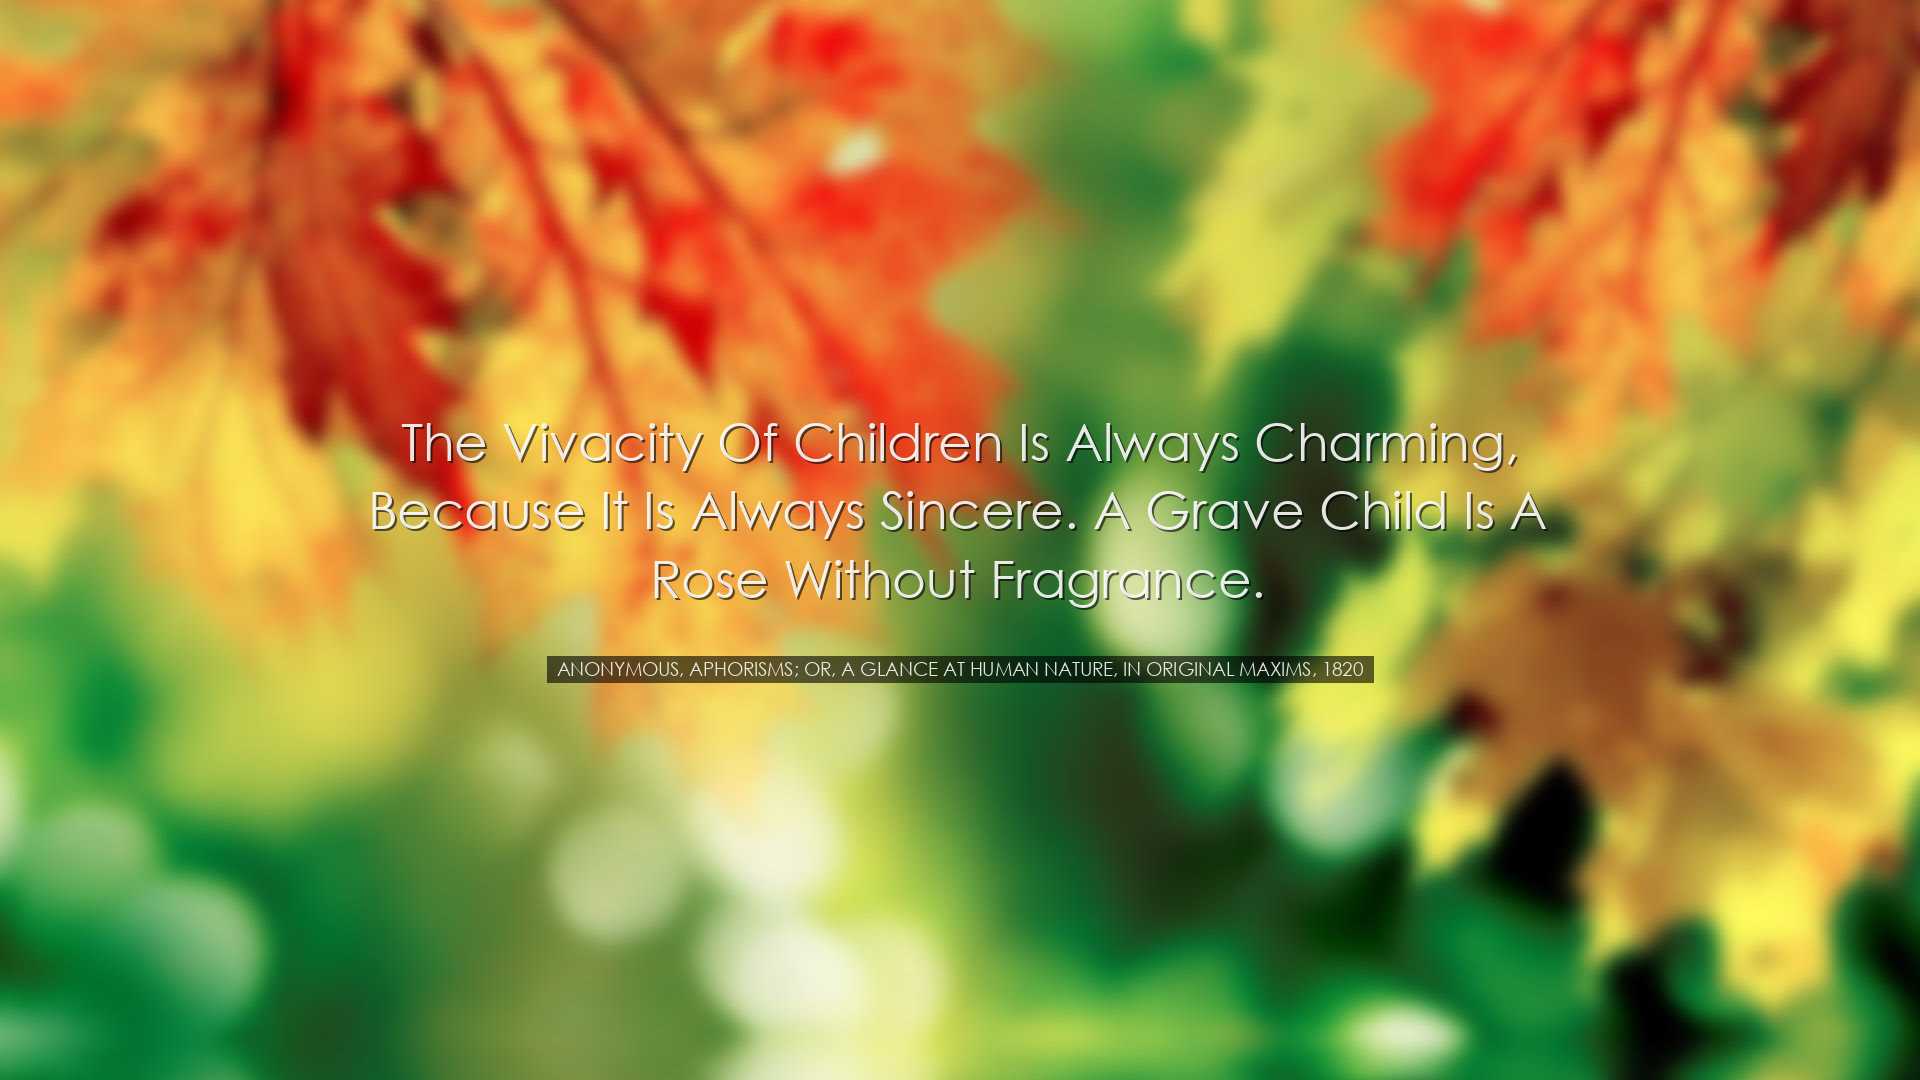 The vivacity of children is always charming, because it is always